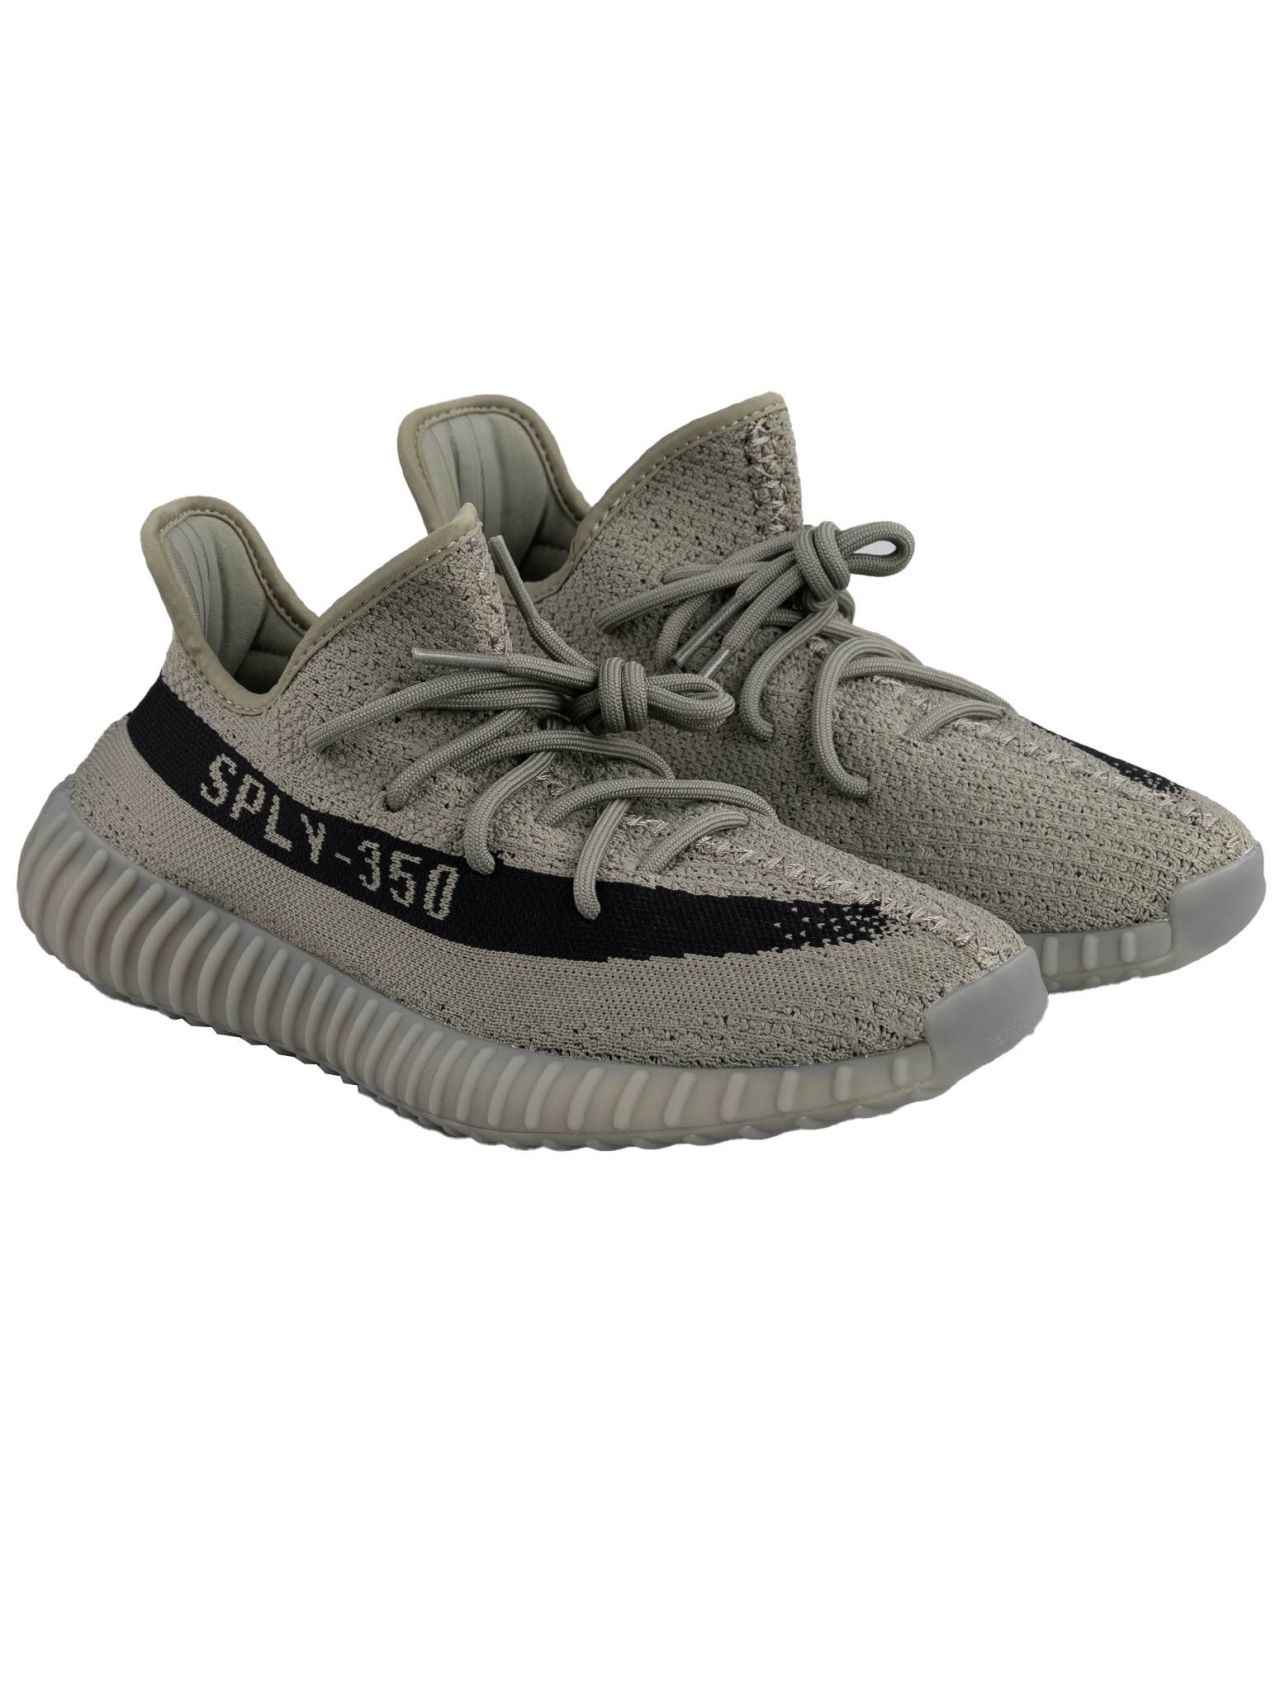 Adidas Yeezy Boost V2 Green Black Pl Sneakers | IsuiT